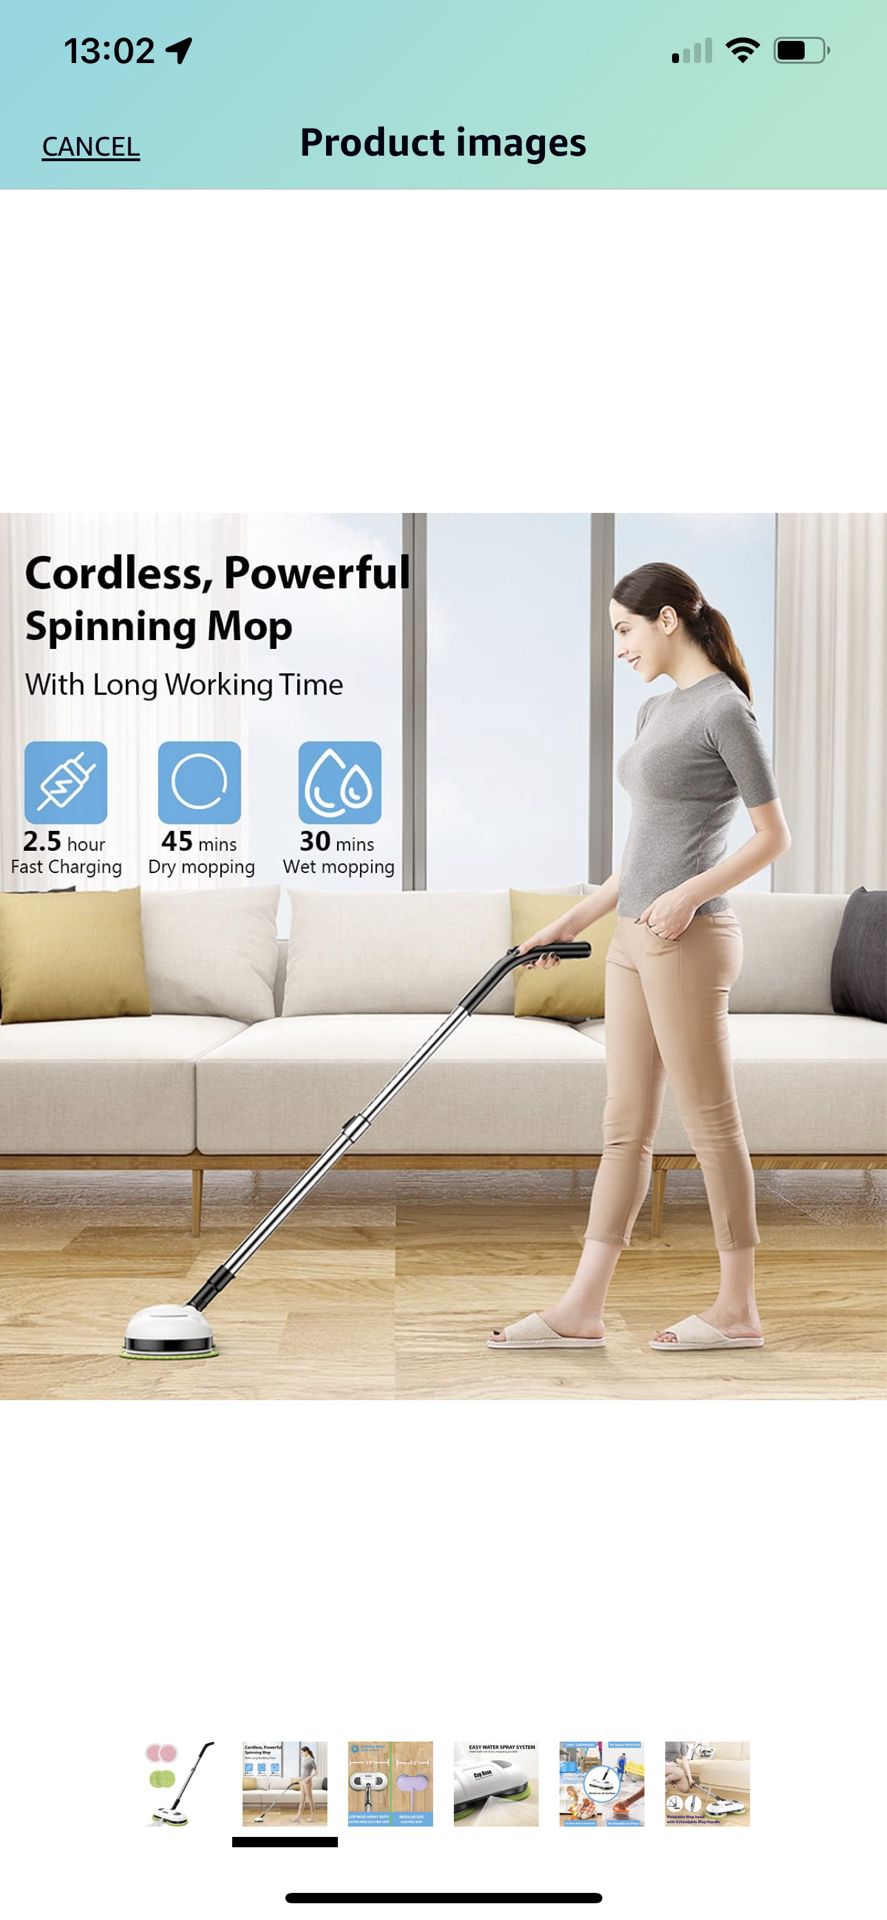 Cop Rose Cordless Electric Mop, large Size Electric Spin Mop with LED Headlight and Built-in Water Tank, Extendable Spray Mop with Mopping & Waxing Pa